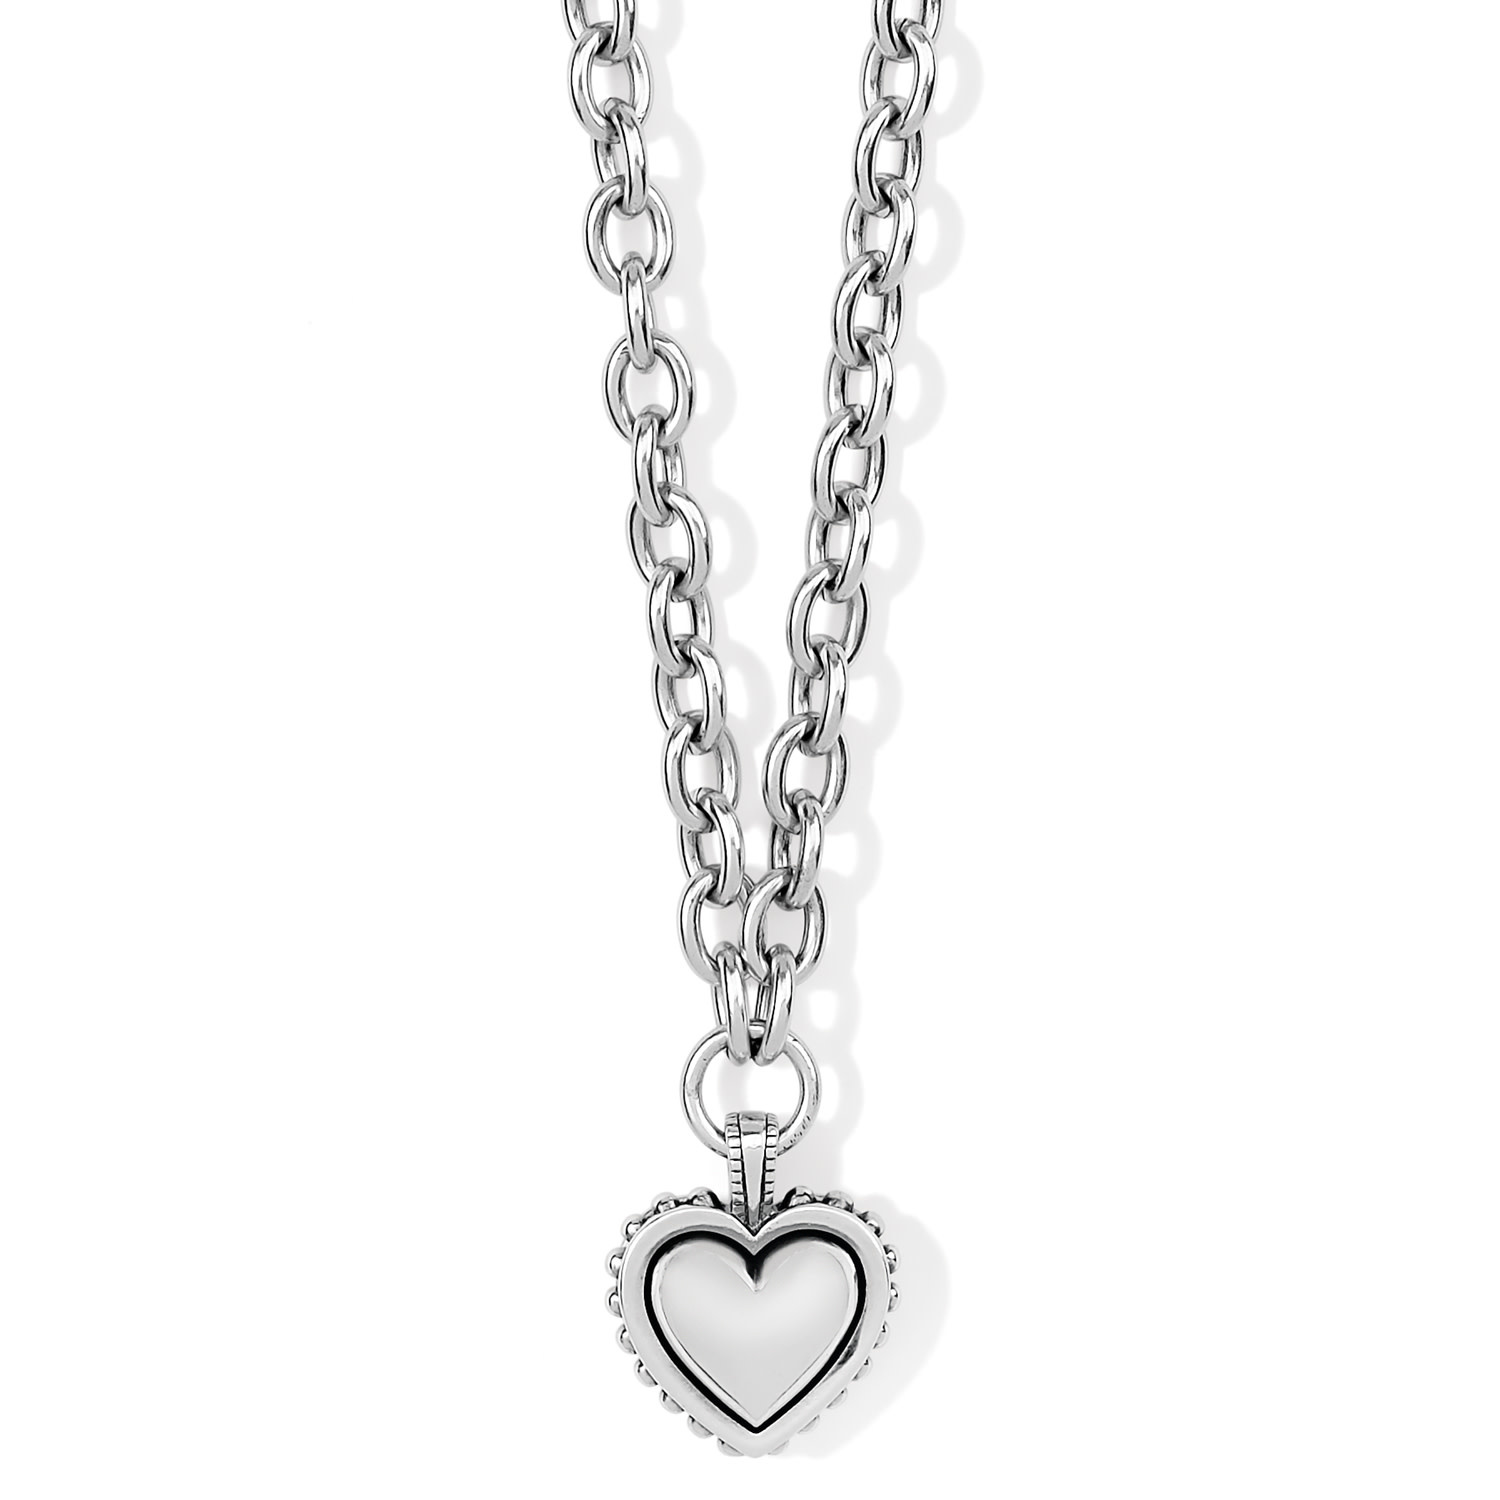 Personalised Interlinking Hearts Necklace With Gold | Posh Totty Designs